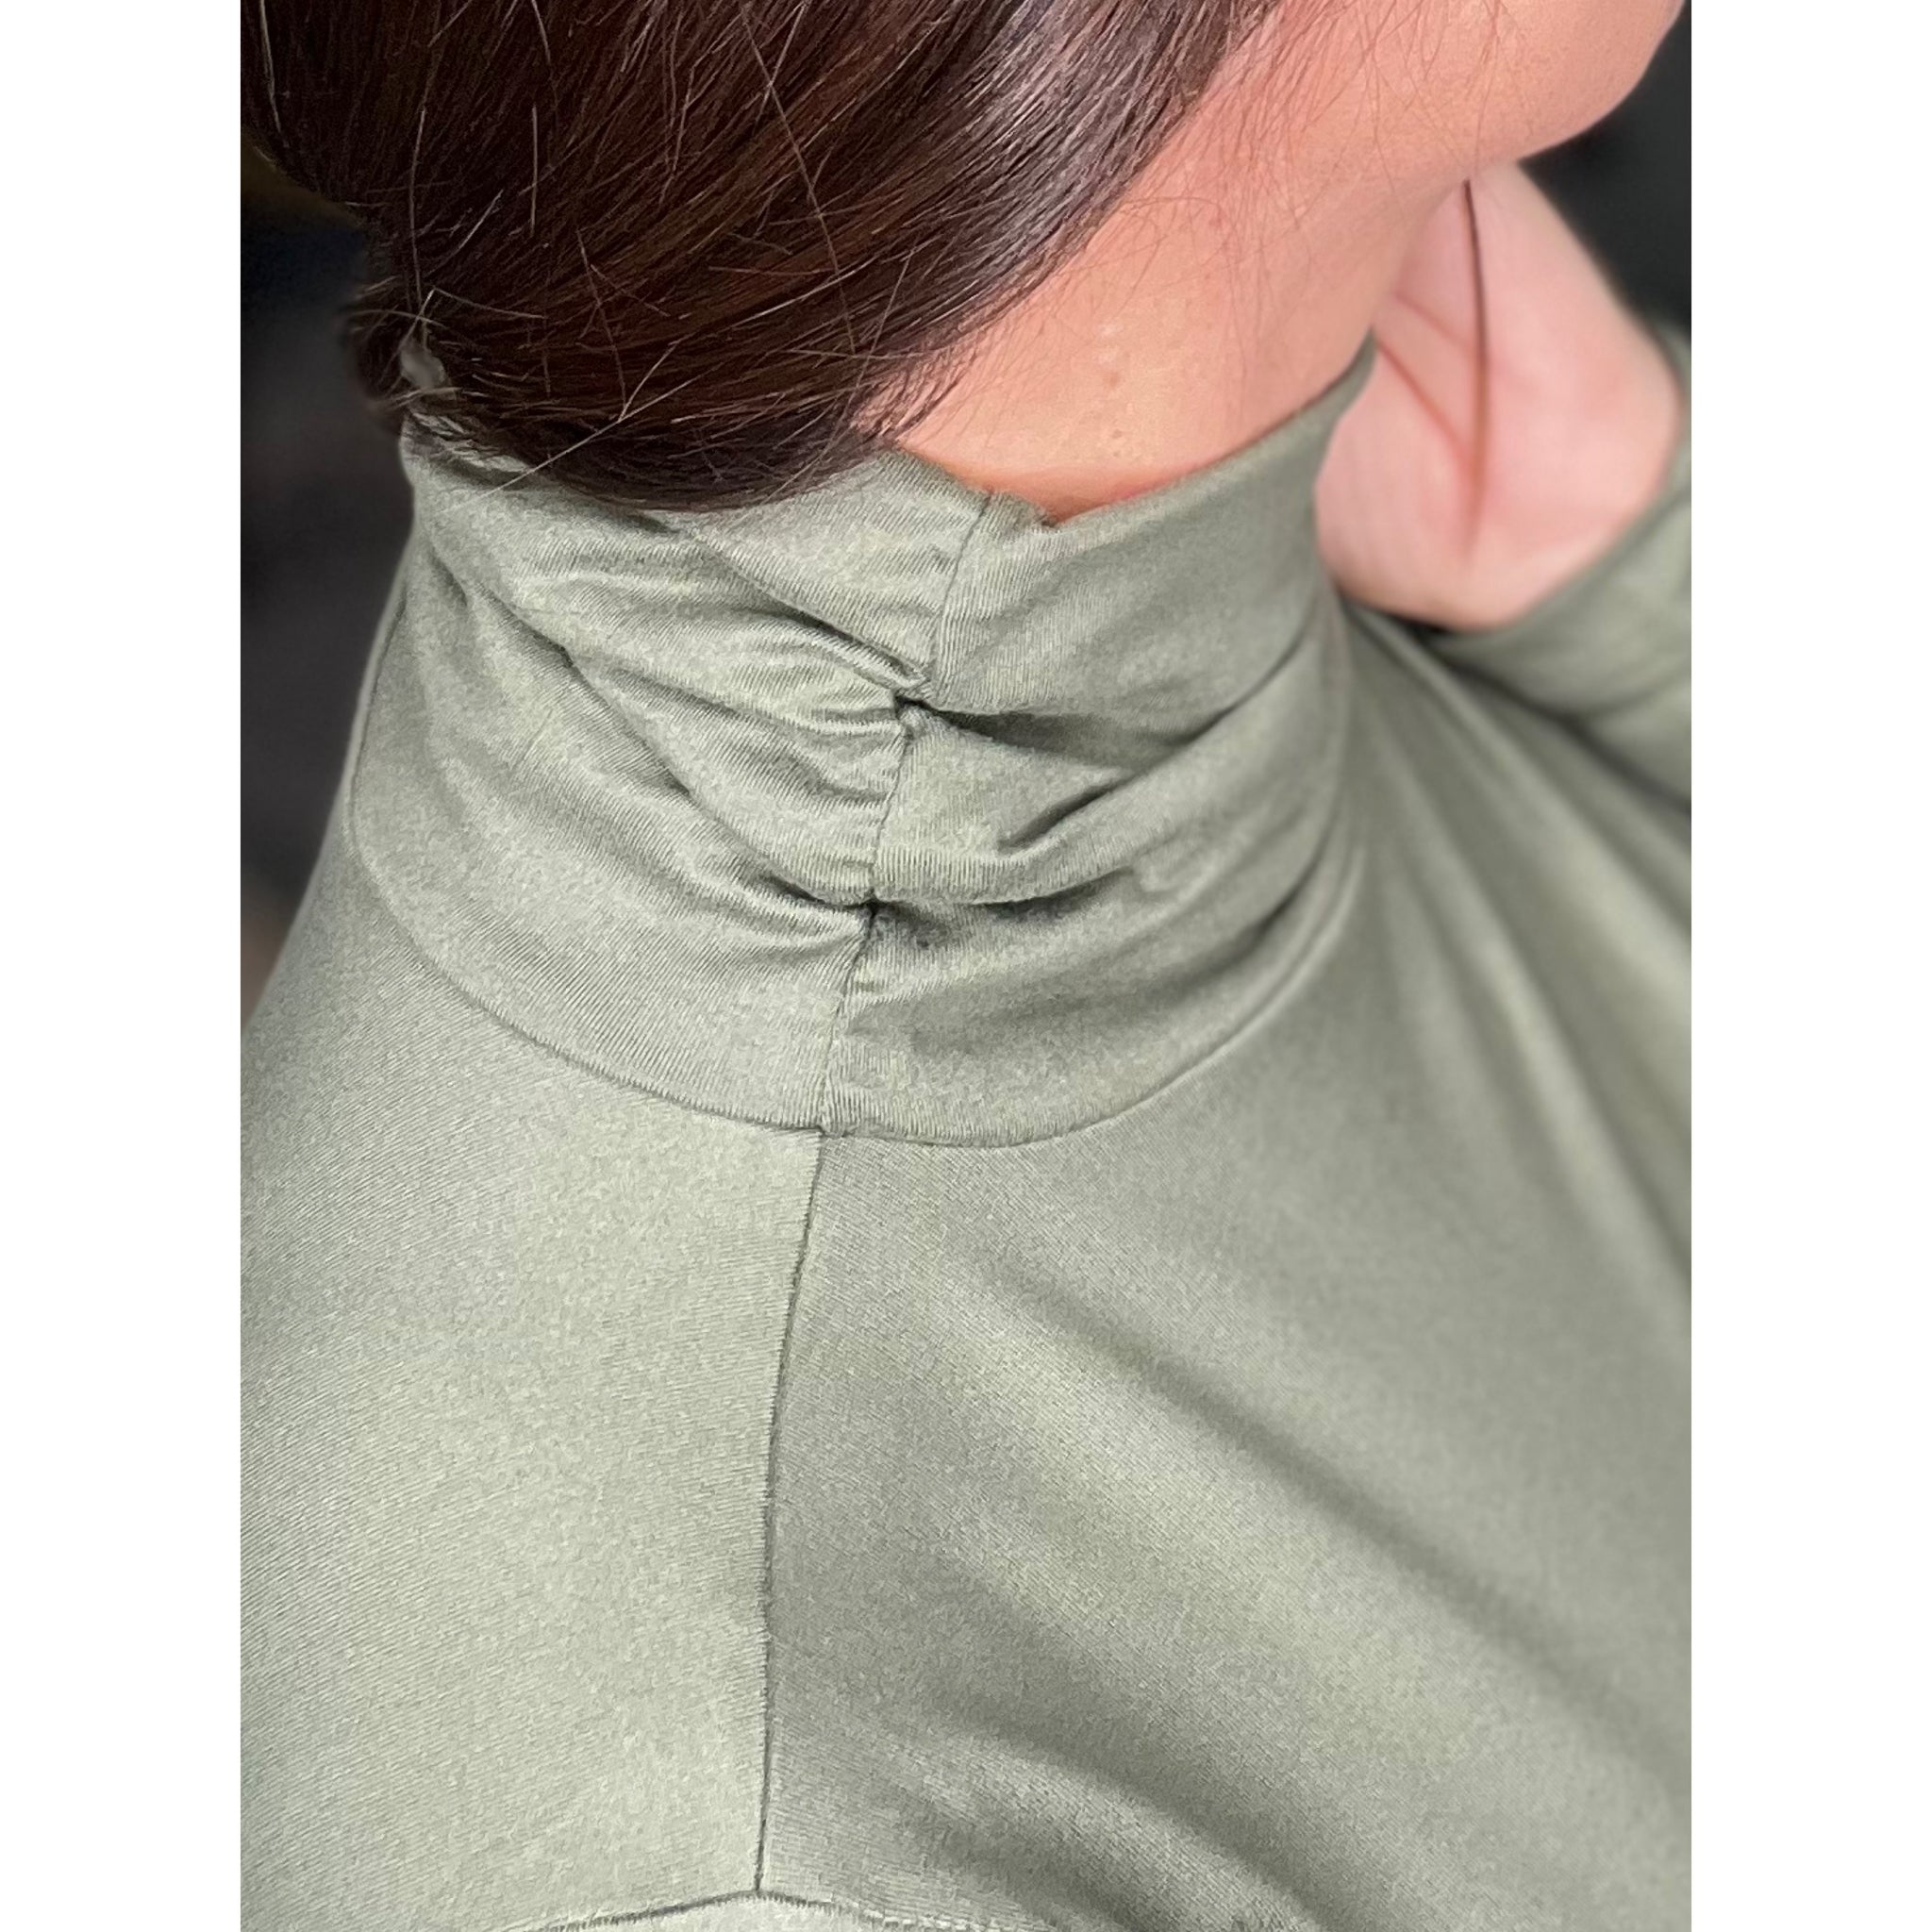 "Coming Out of My Shell" Mock Turtle High Ruched Neck Long Sleeve Soft Stretchy Olive Green